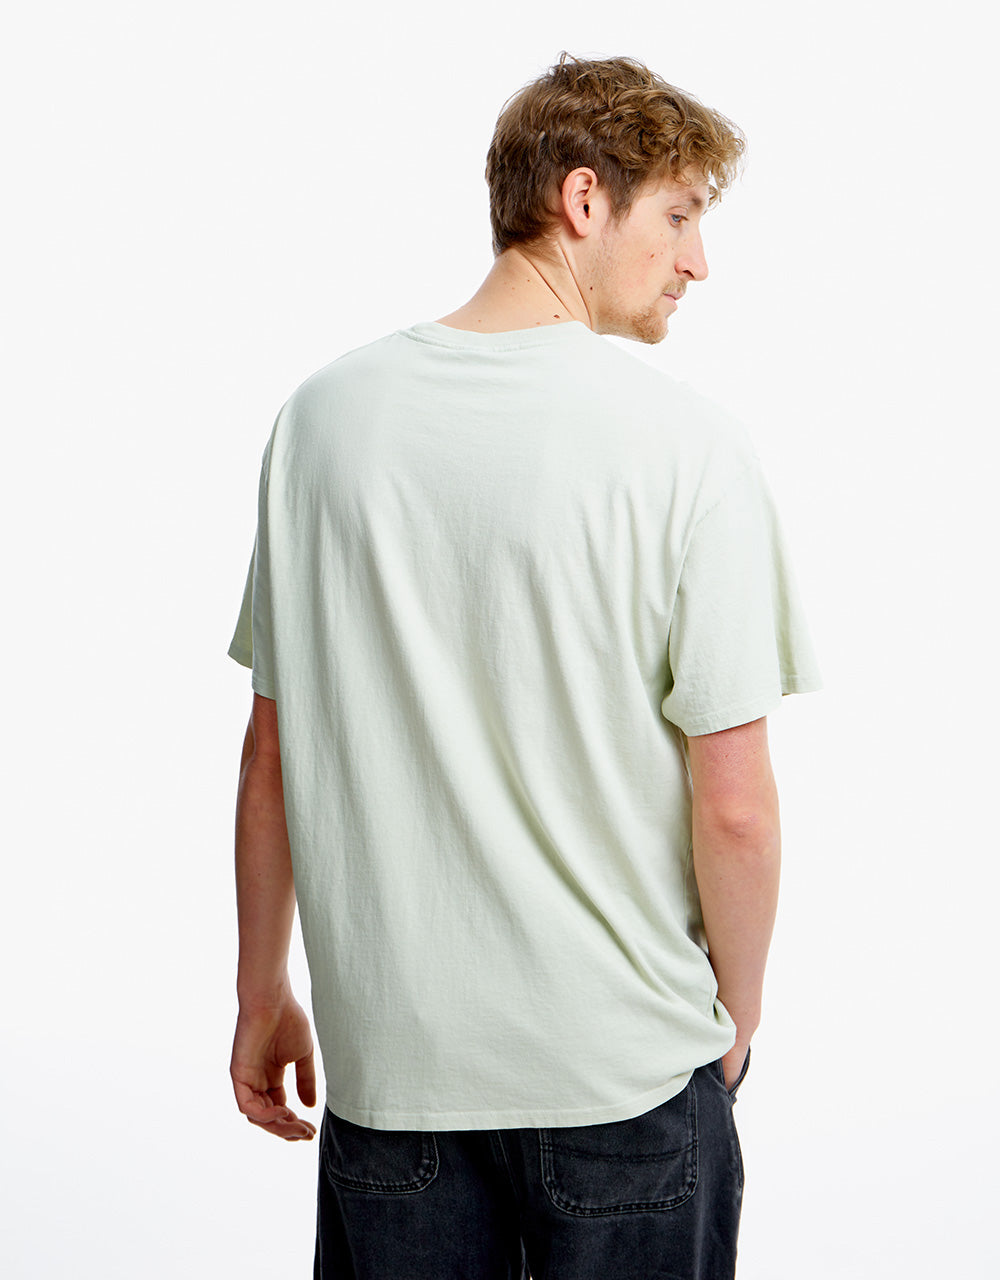 HUF x Pleasures Dyed S/S T-Shirt - Green